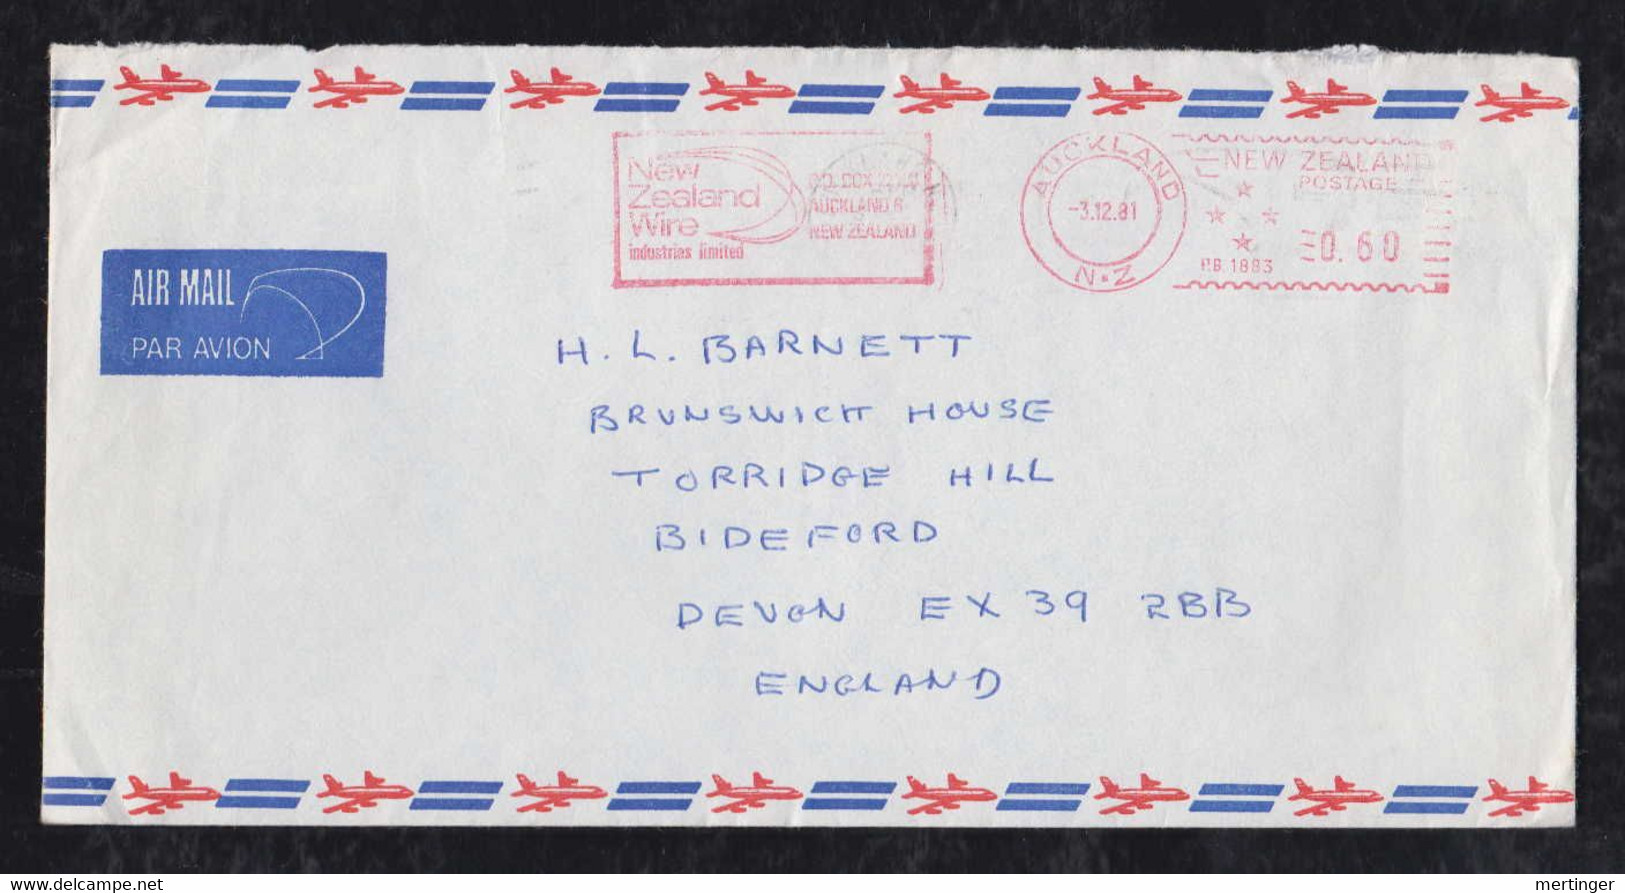 New Zealand 1981 Meter Airmail Cover $0,60 Auckland To Bideford England New Zealand Wire Advertising - Lettres & Documents